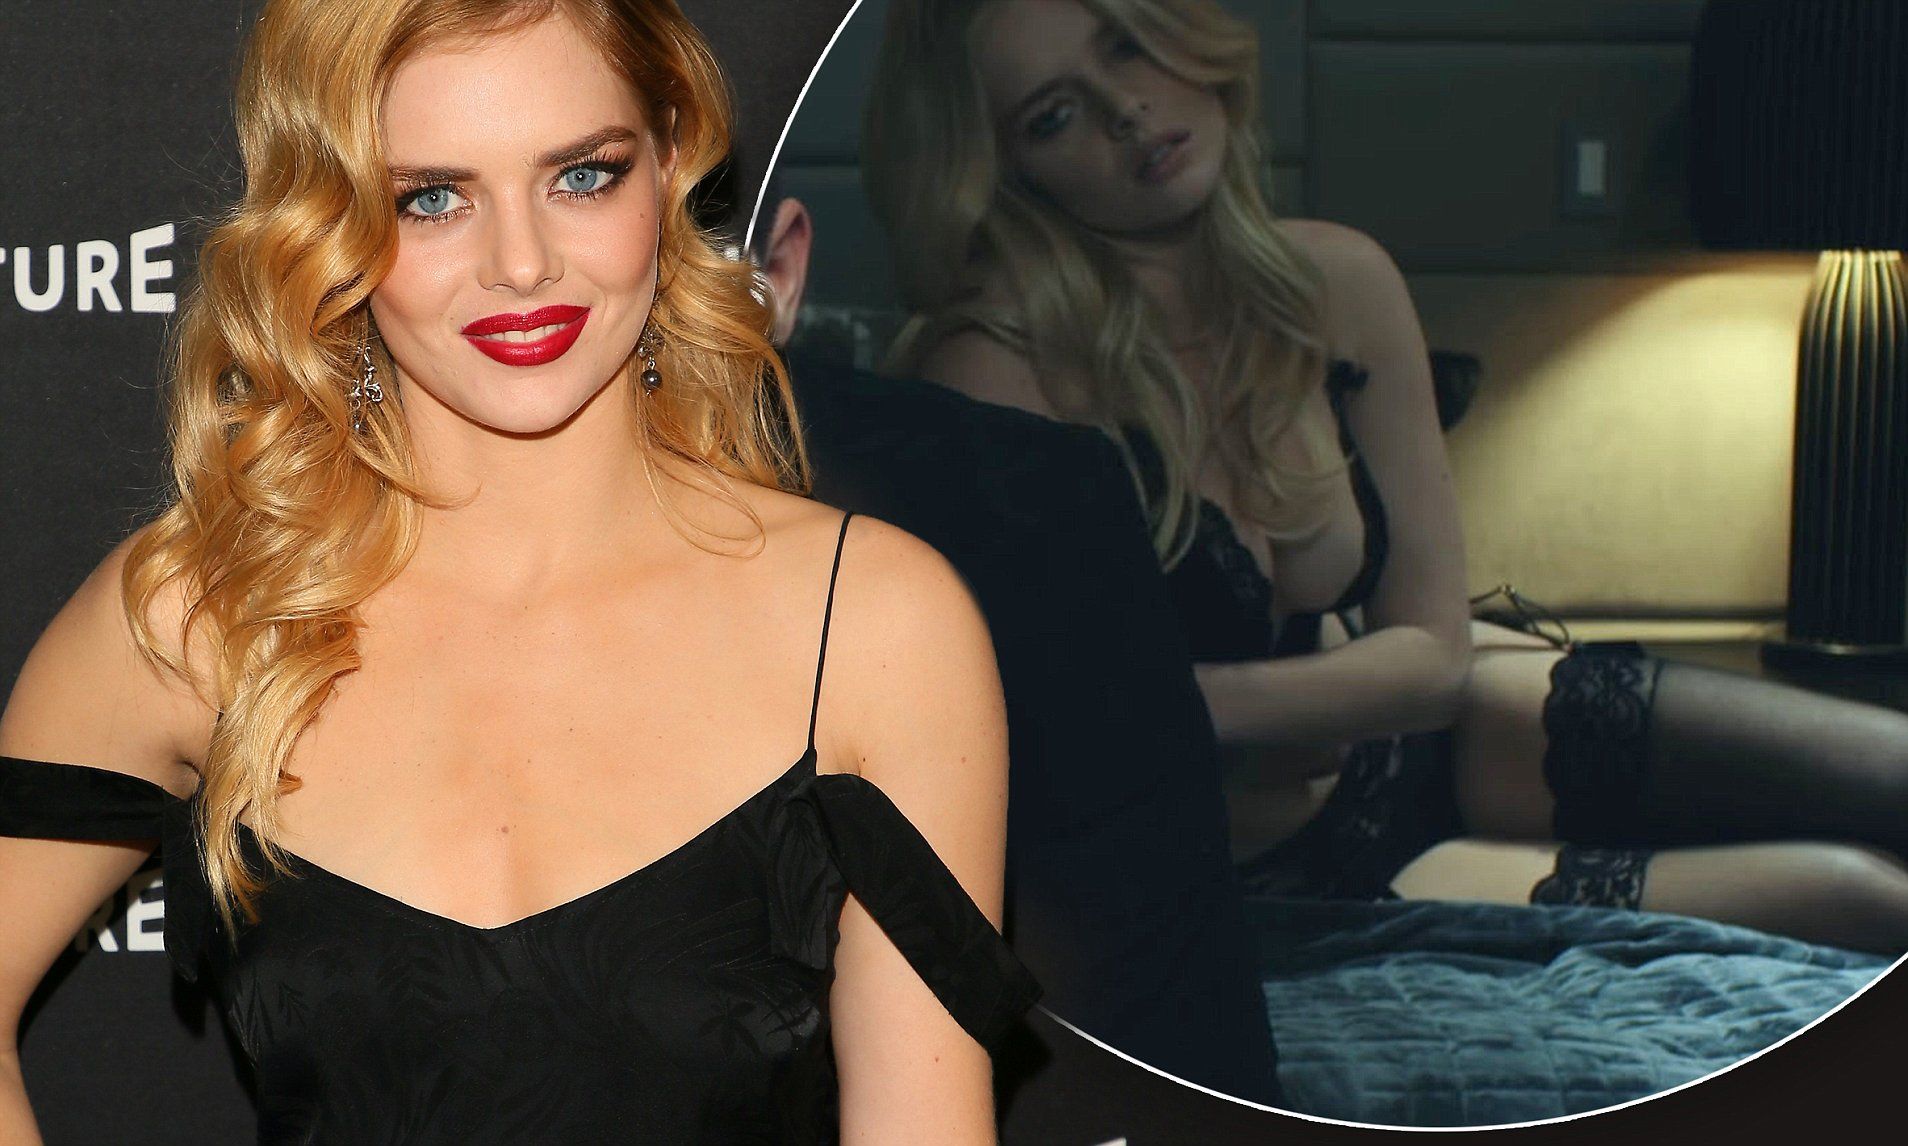 Samara Weaving strips down to lingerie in new music video. Daily